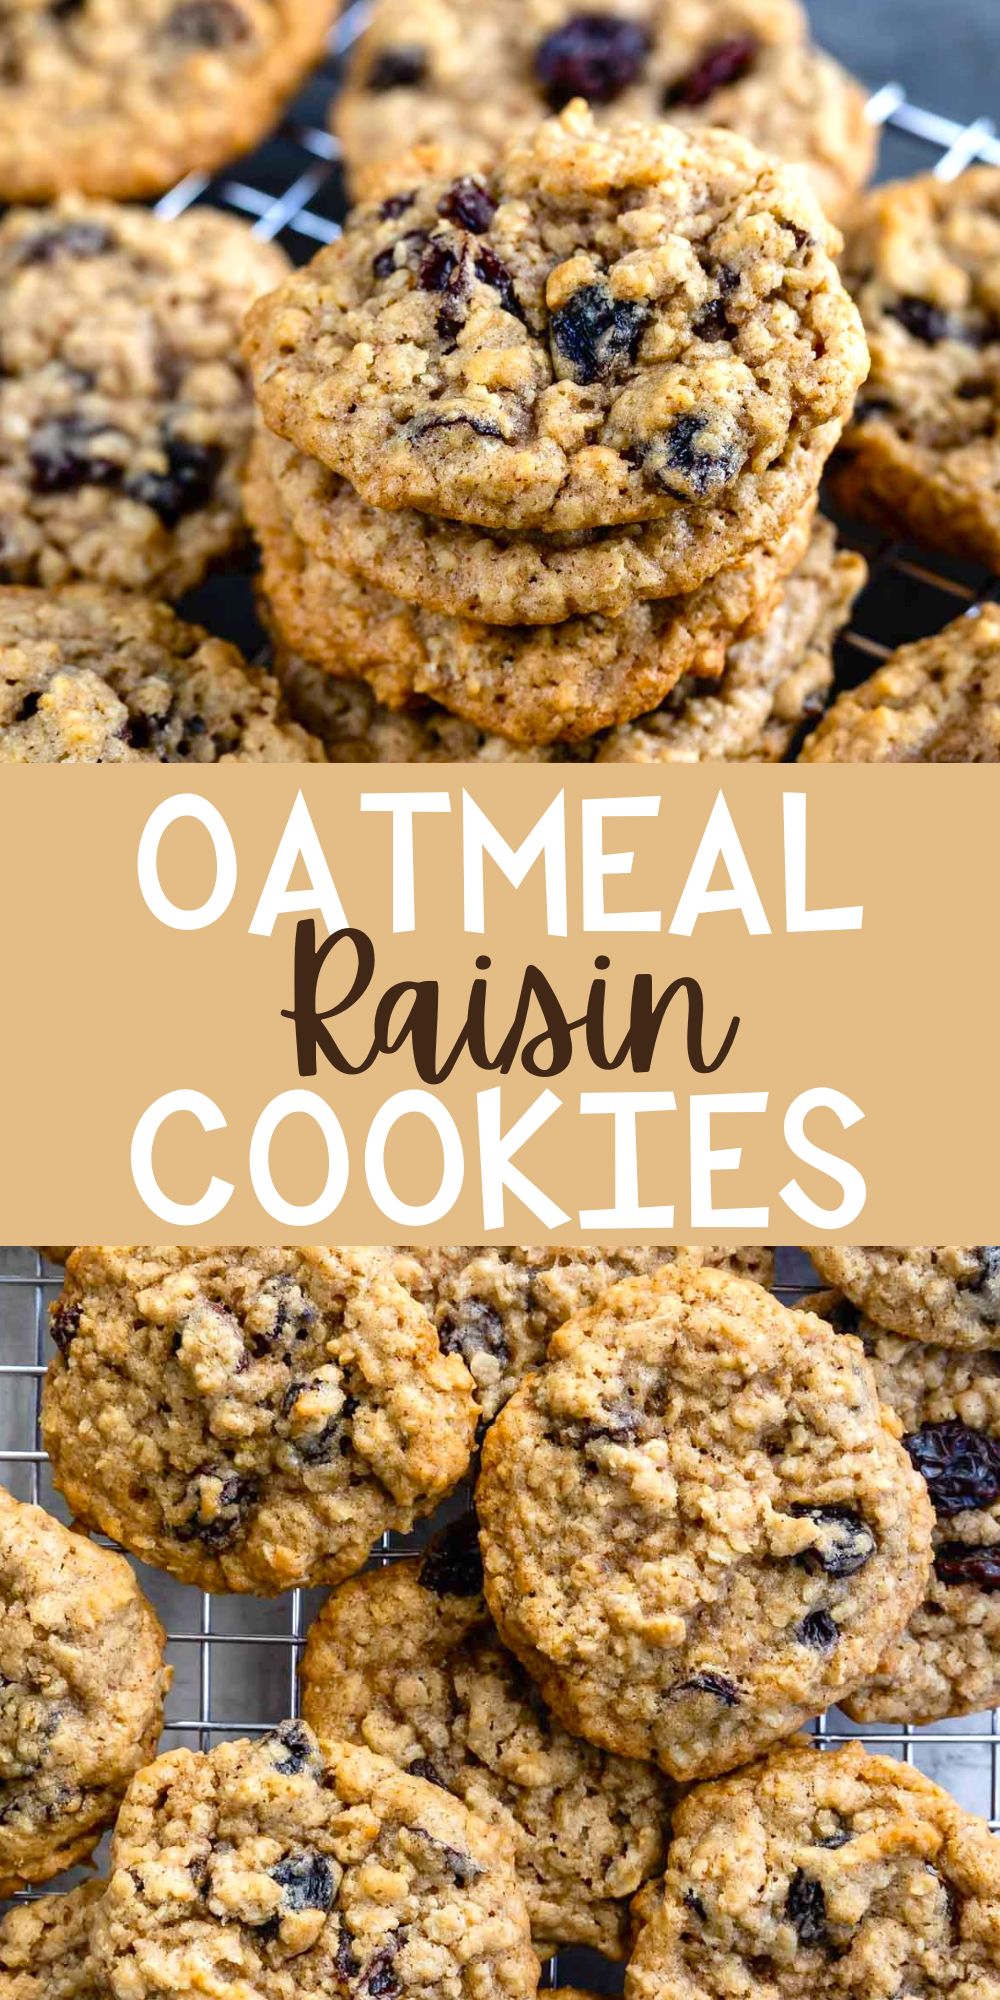 two photos of stacked oatmeal cookies with raisins on a drying rack with words on the image.